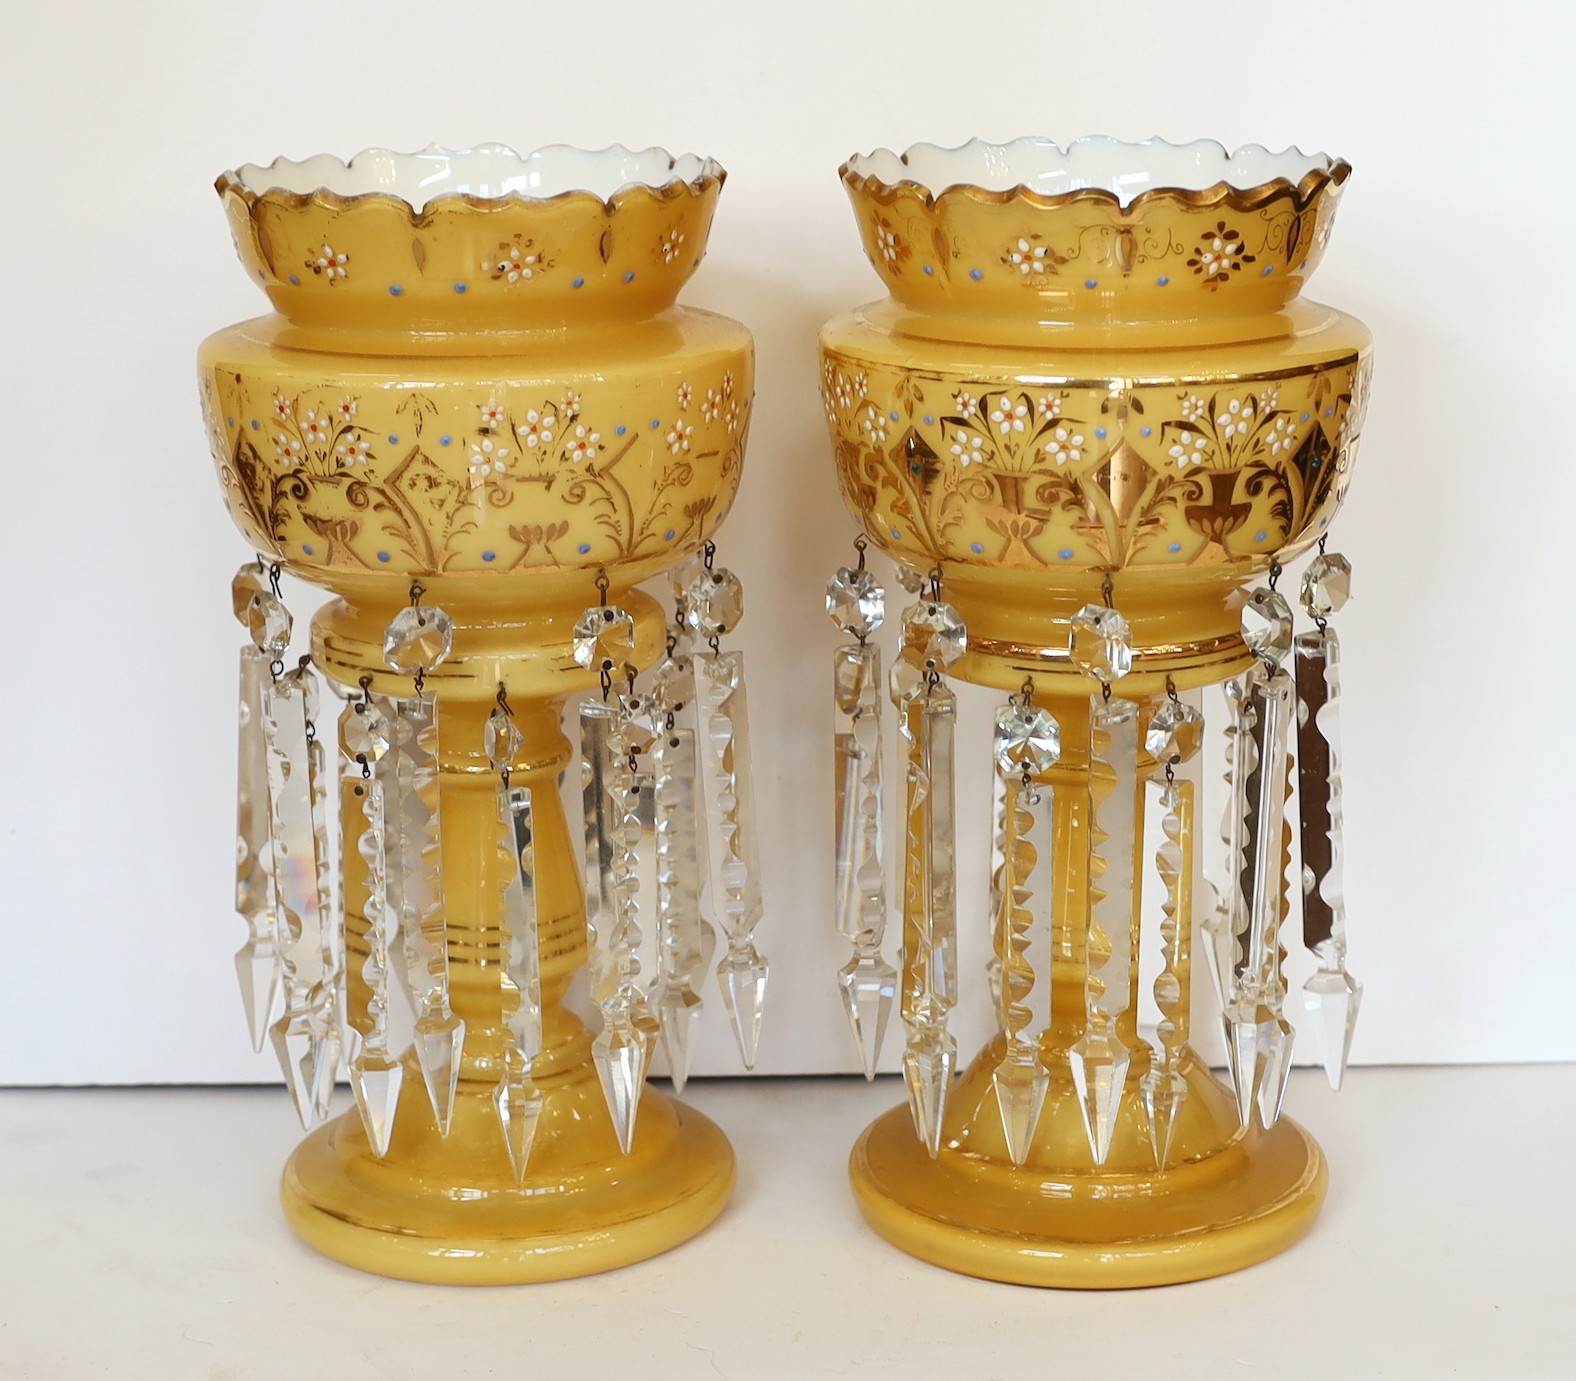 A pair of late 19th century Bohemian opaque glass lustres with enamelled and gilt floral decoration, height 37cm